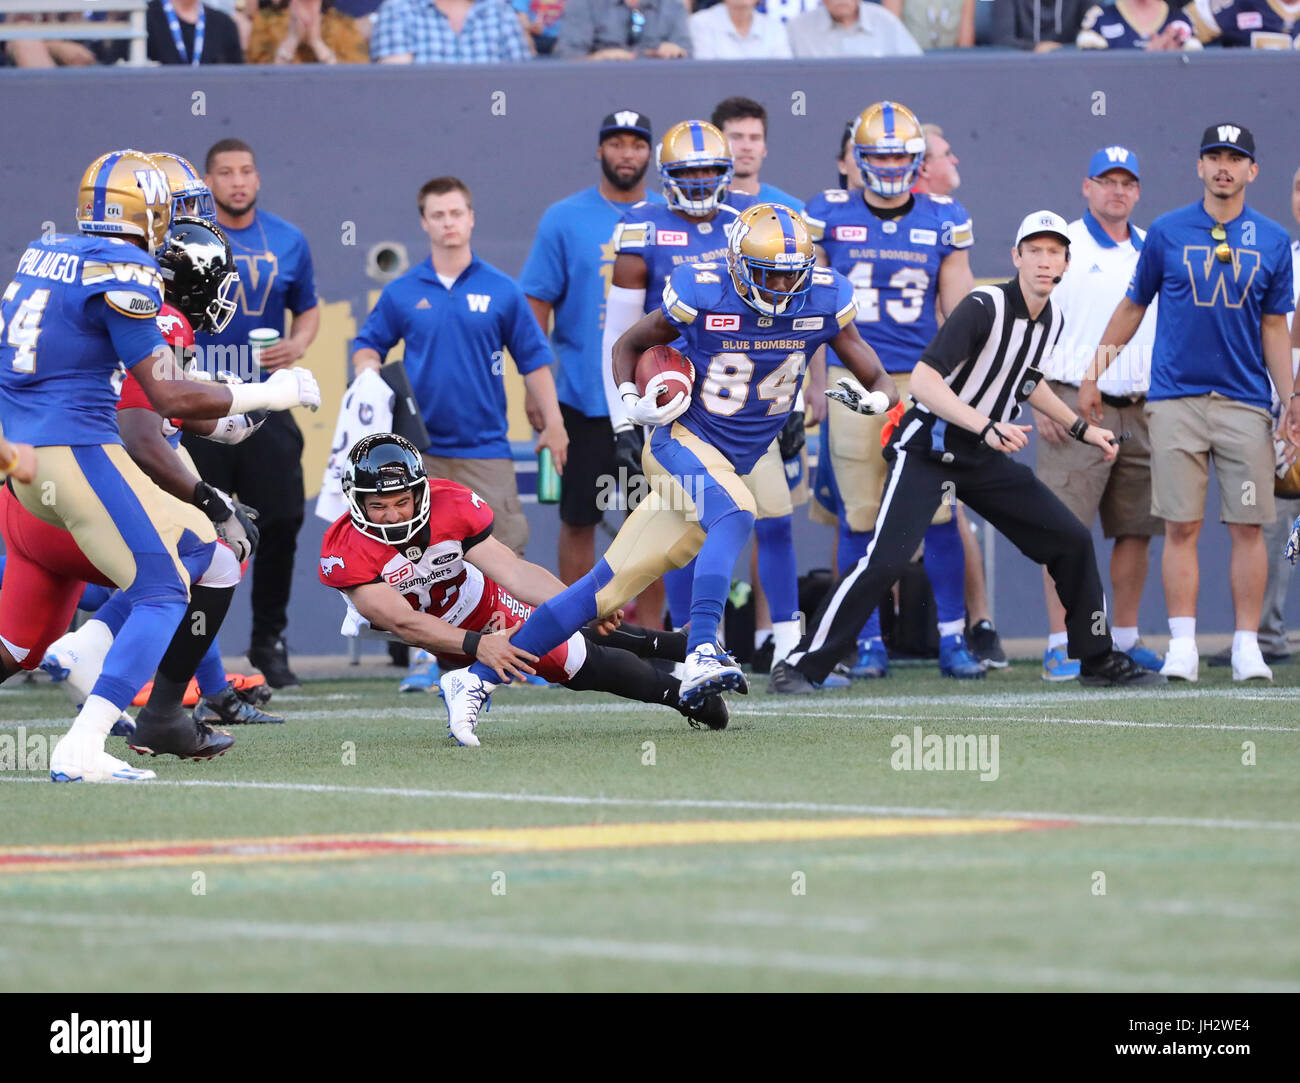 Winnipeg, Manitoba, CAN. 7th July, 2017. July 7, 2017; Winnipeg, Manitoba, CAN; Winnipeg Blue Bombers wide receiver Ryan Lankford (84) steps past a diving Calgary Stampeders kicker Rene Paredes (30) during the first half at Investors Group Field. Mandatory Credit: Bruce Fedyck- Zuma Media Credit: Bruce Fedyck/ZUMA Wire/Alamy Live News Stock Photo